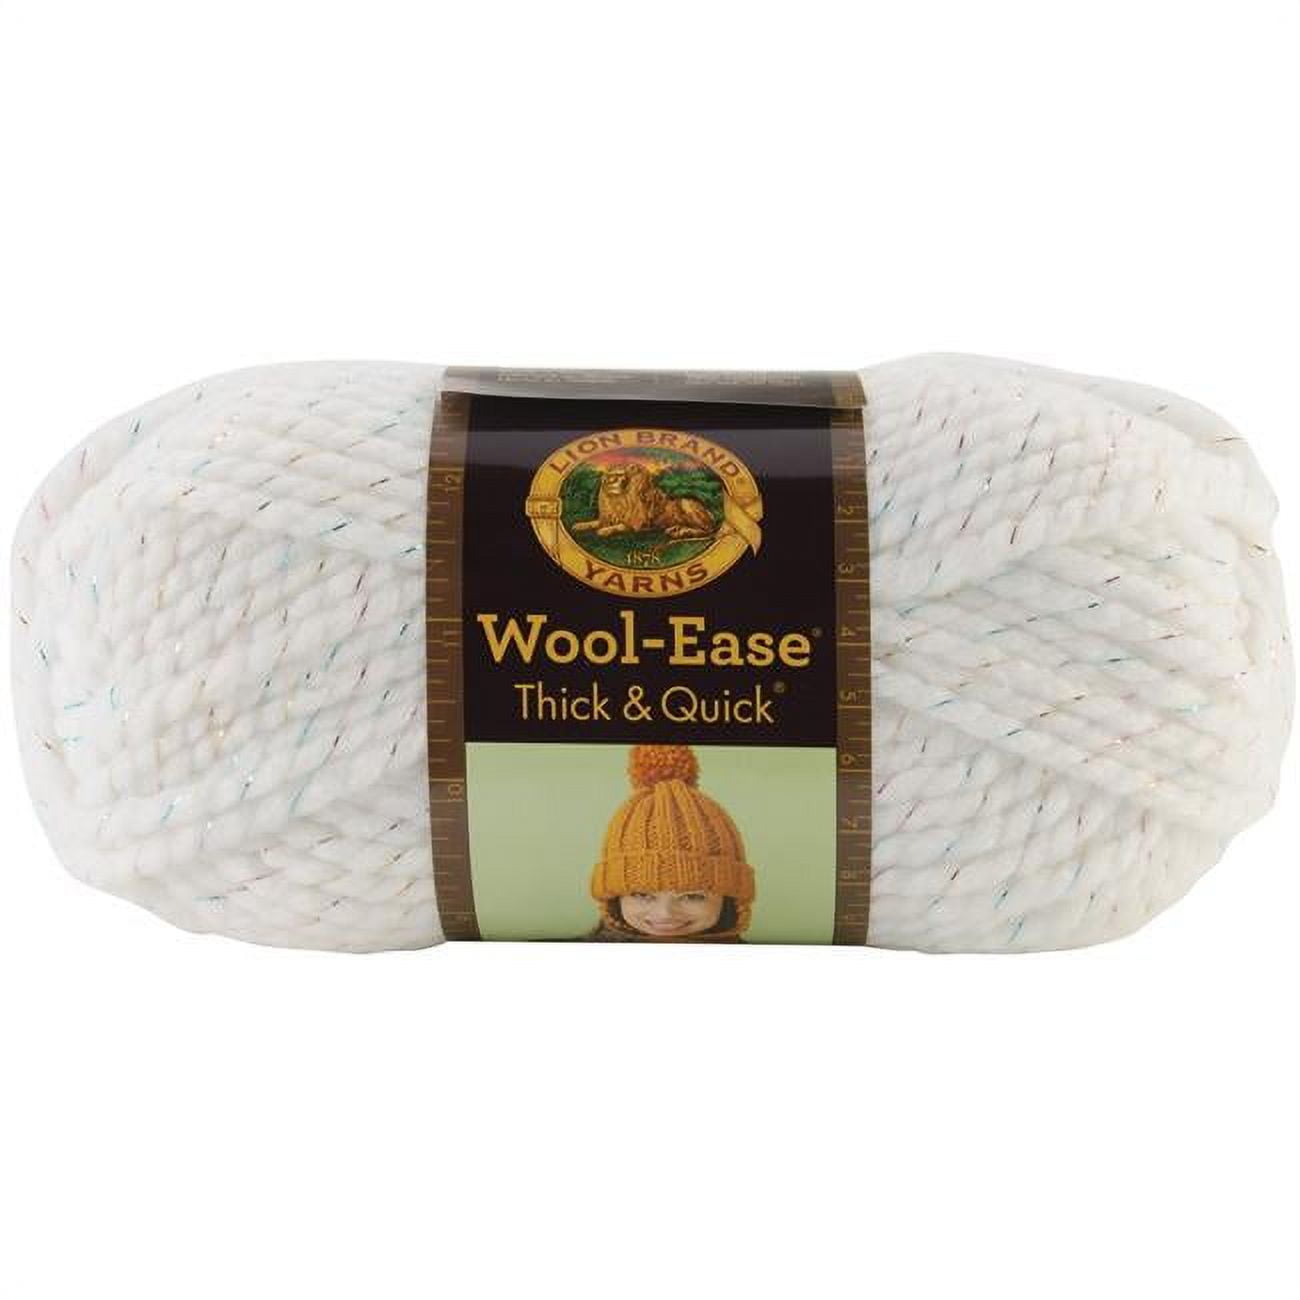 Lion Brand Wool-Ease Yarn -Black, 1 count - Fred Meyer